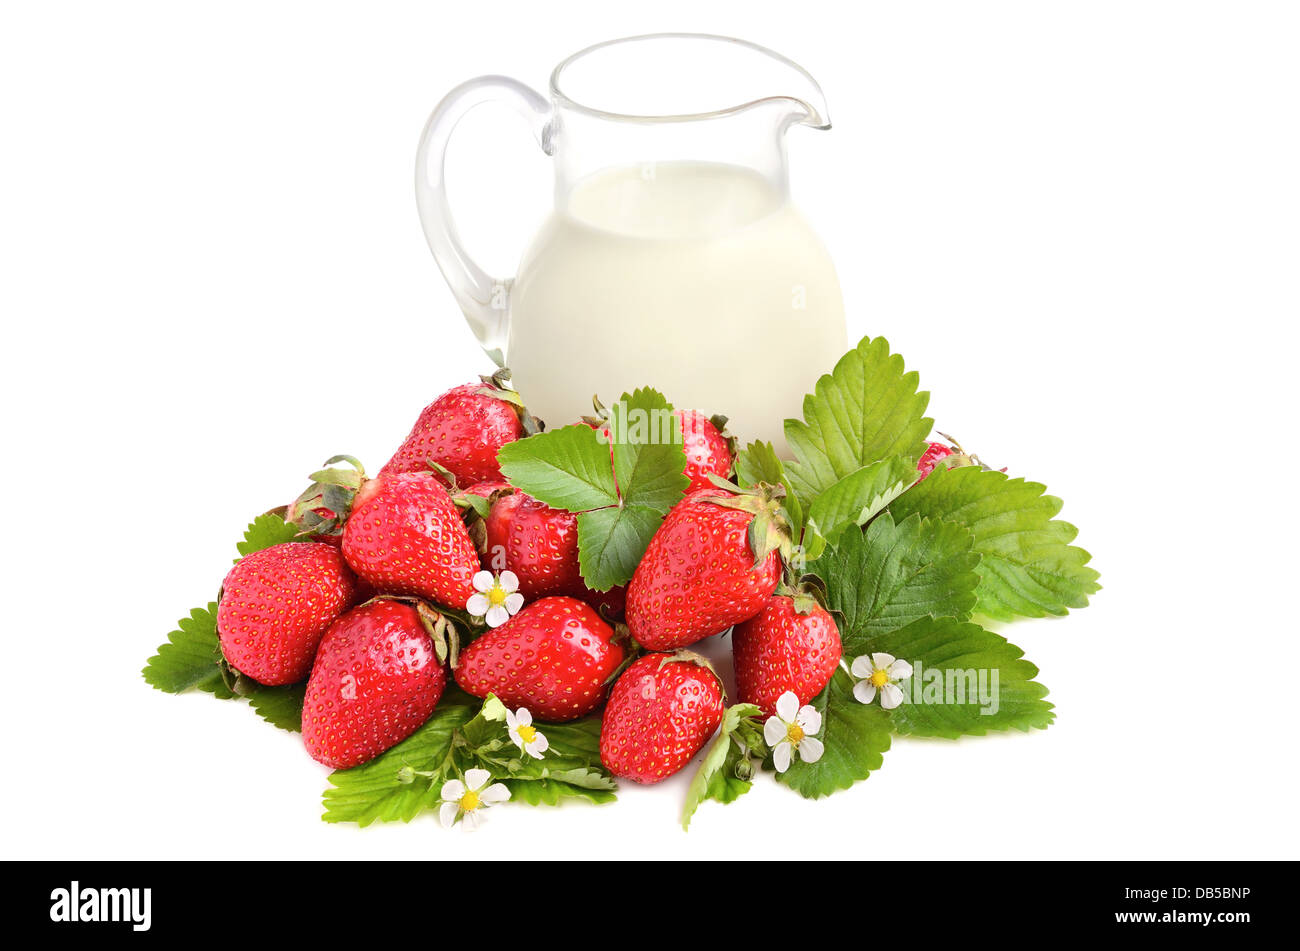 Glass jug full of milk, strawberries with green leaves and flowers on white background Stock Photo